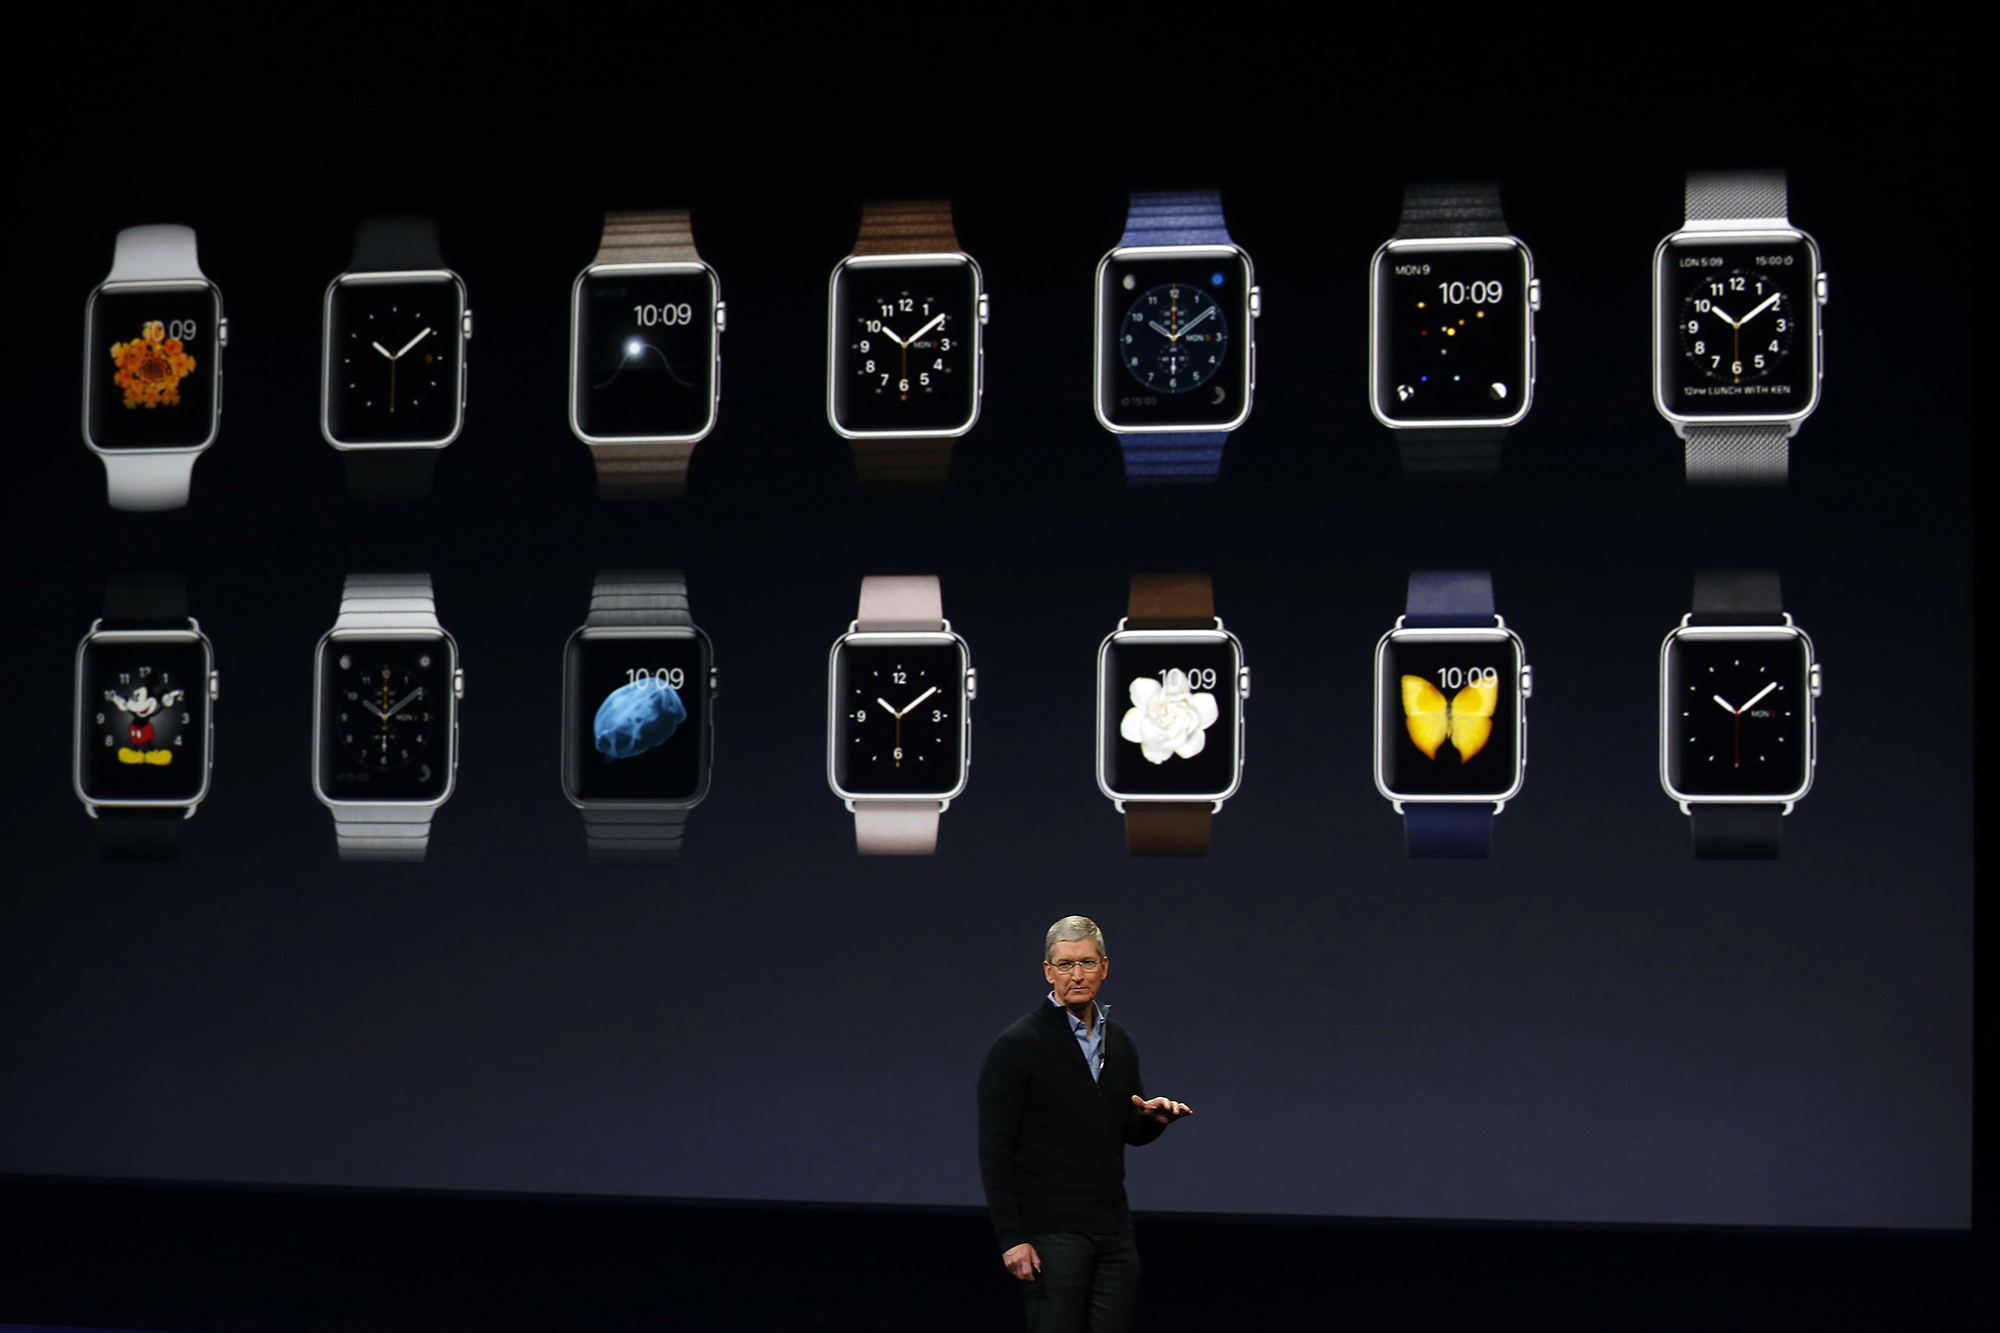 Apple CEO Tim Cook debuting the Apple Watch collection during an Apple special event at the Yerba Buena Center for the Arts on March 9, 2015 in San Francisco.